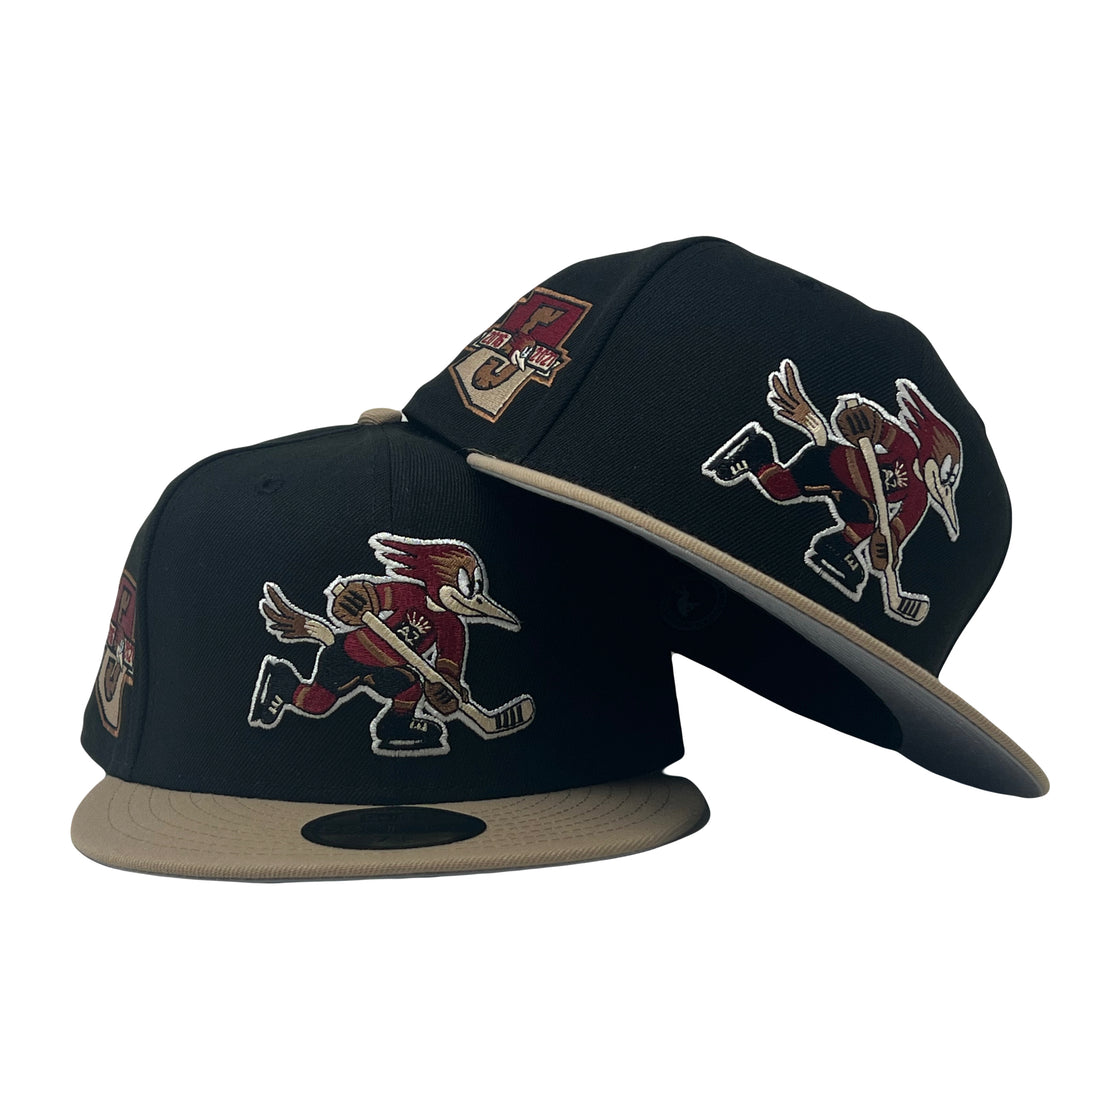 Tucson Roadrunners 5th Anniversary American Hockey League 5950 New Era Fitted Hat